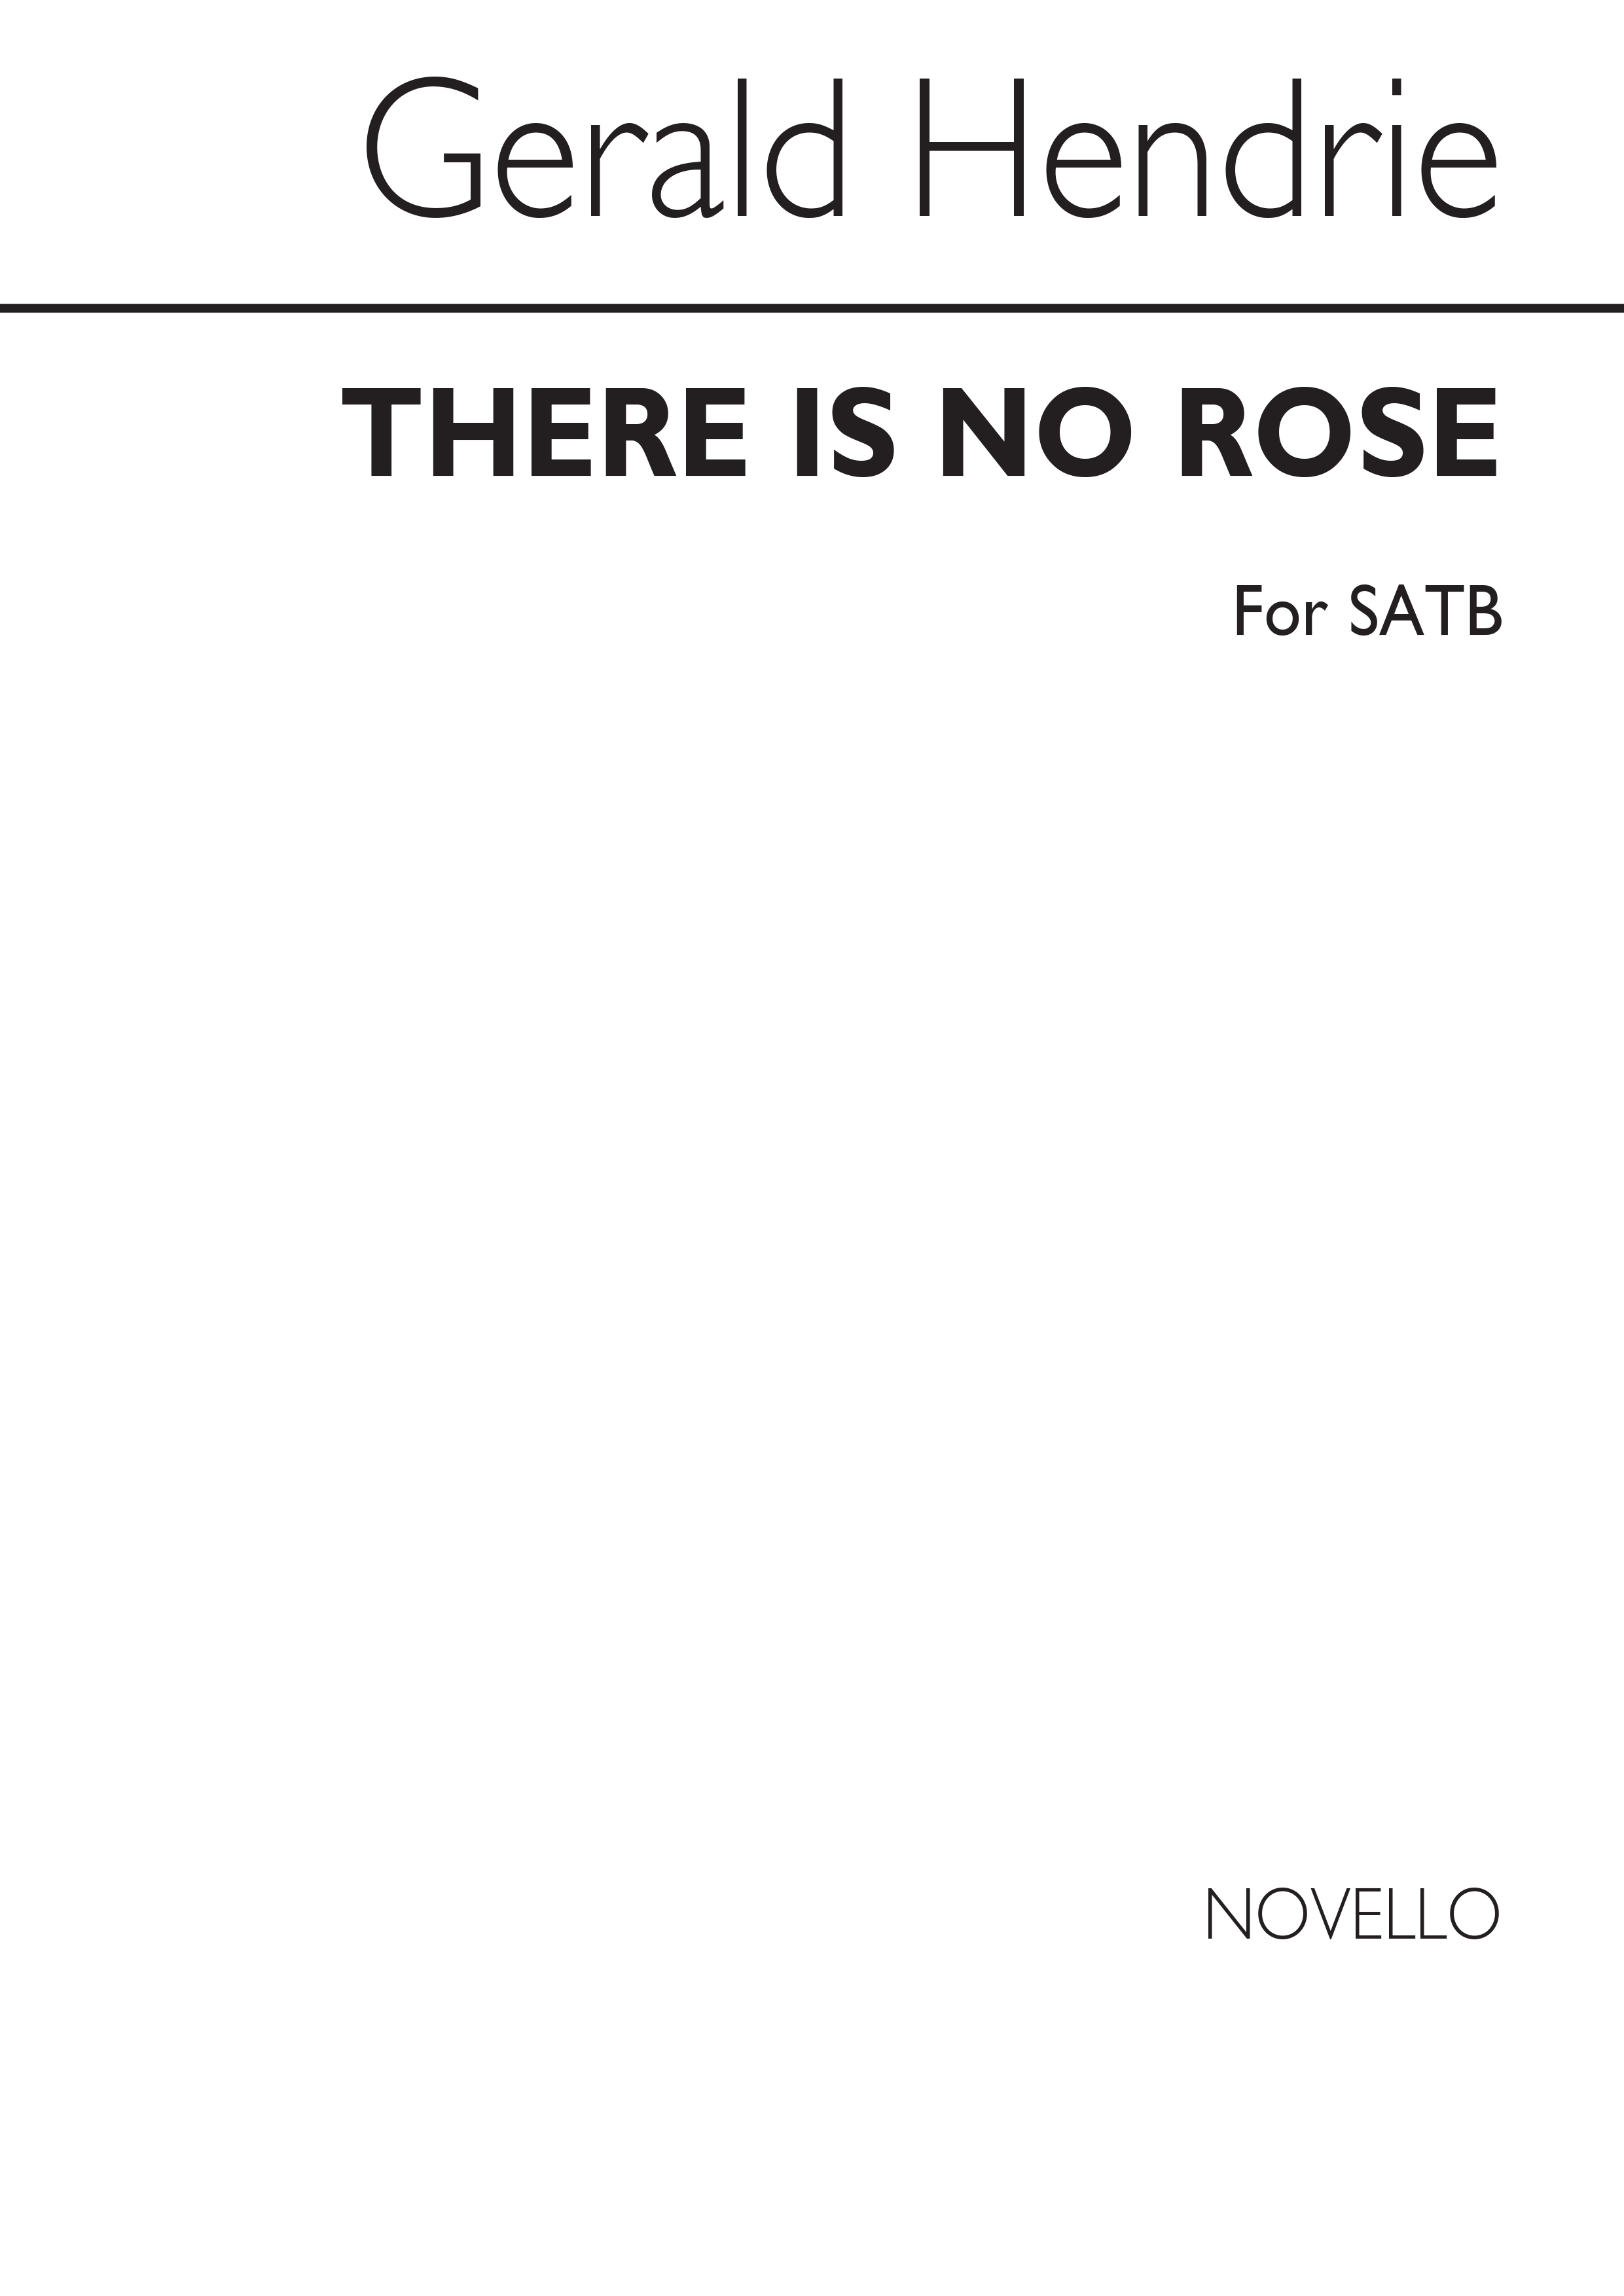 Hendrie: There Is No Rose for SATB Chorus